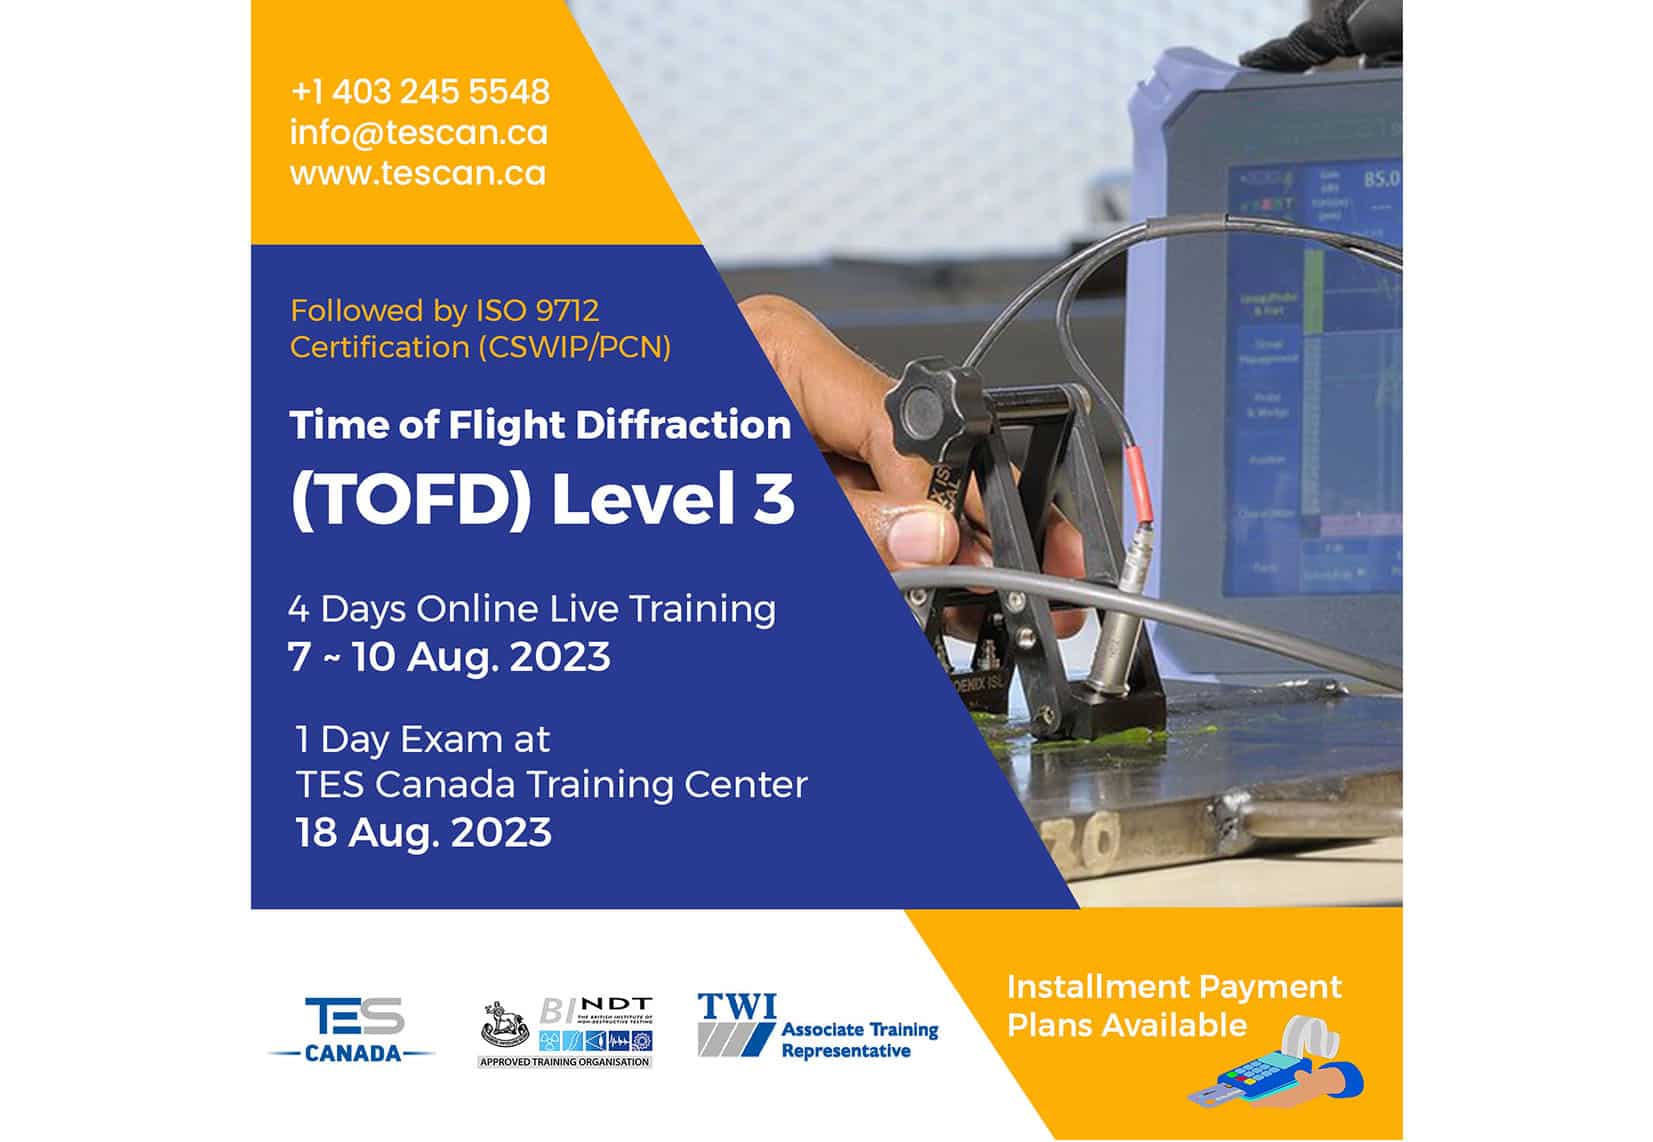 Time of Flight Diffraction (TOFD) Level 3